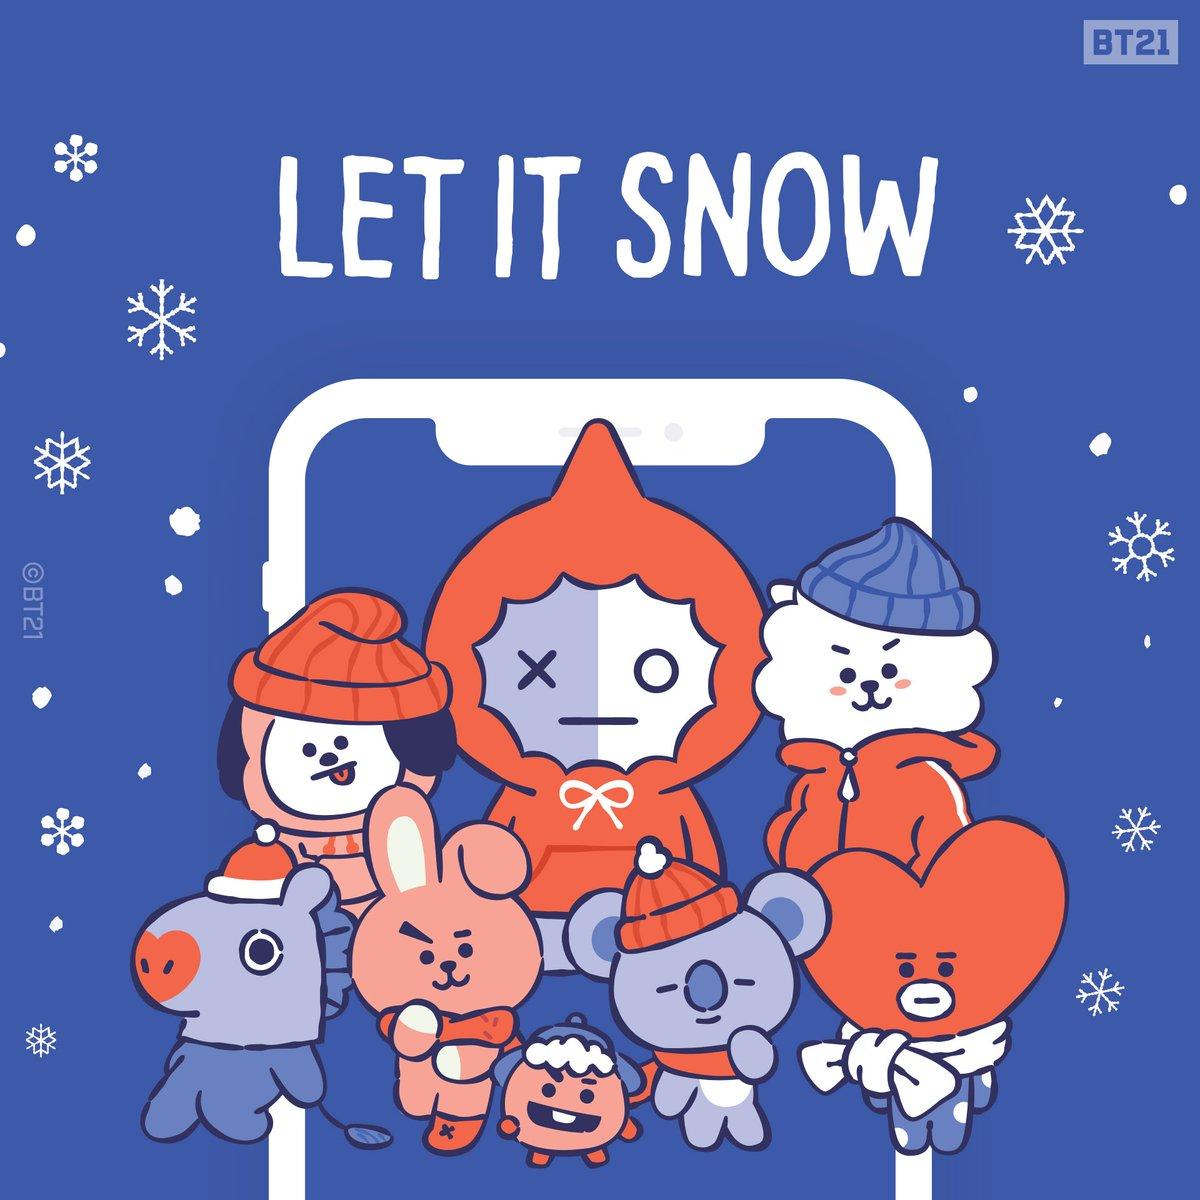 BT21's tweet or cold, it doesn't matter wherever you